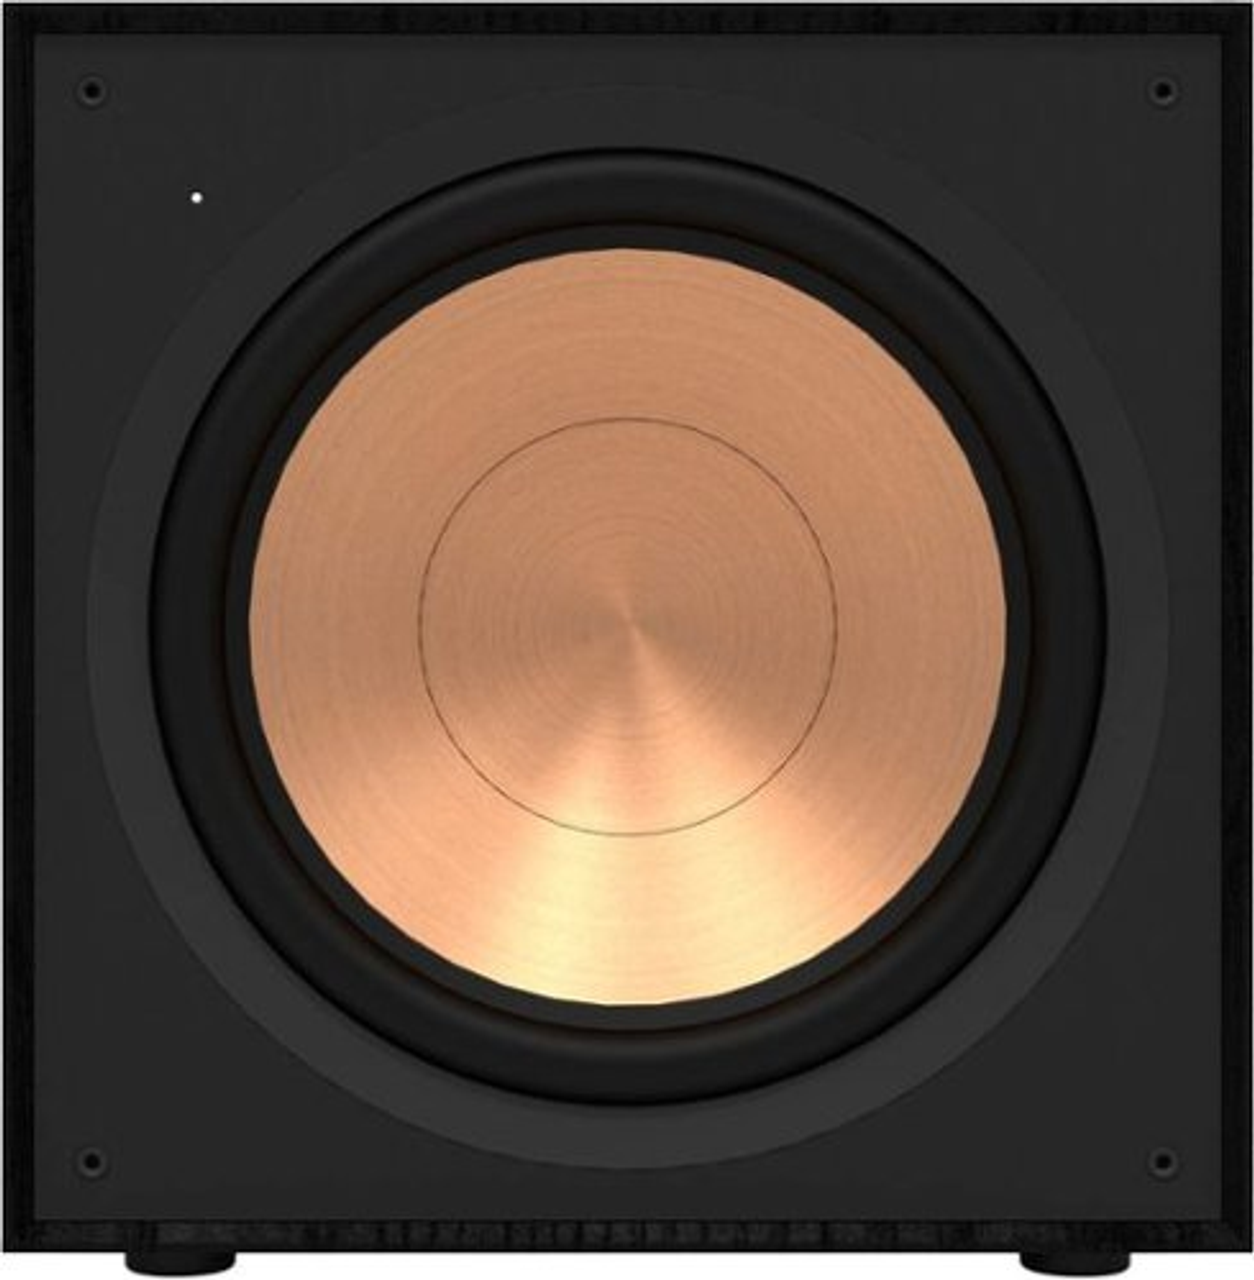 Klipsch - Reference Series 12" 400W Powered Subwoofer - Black